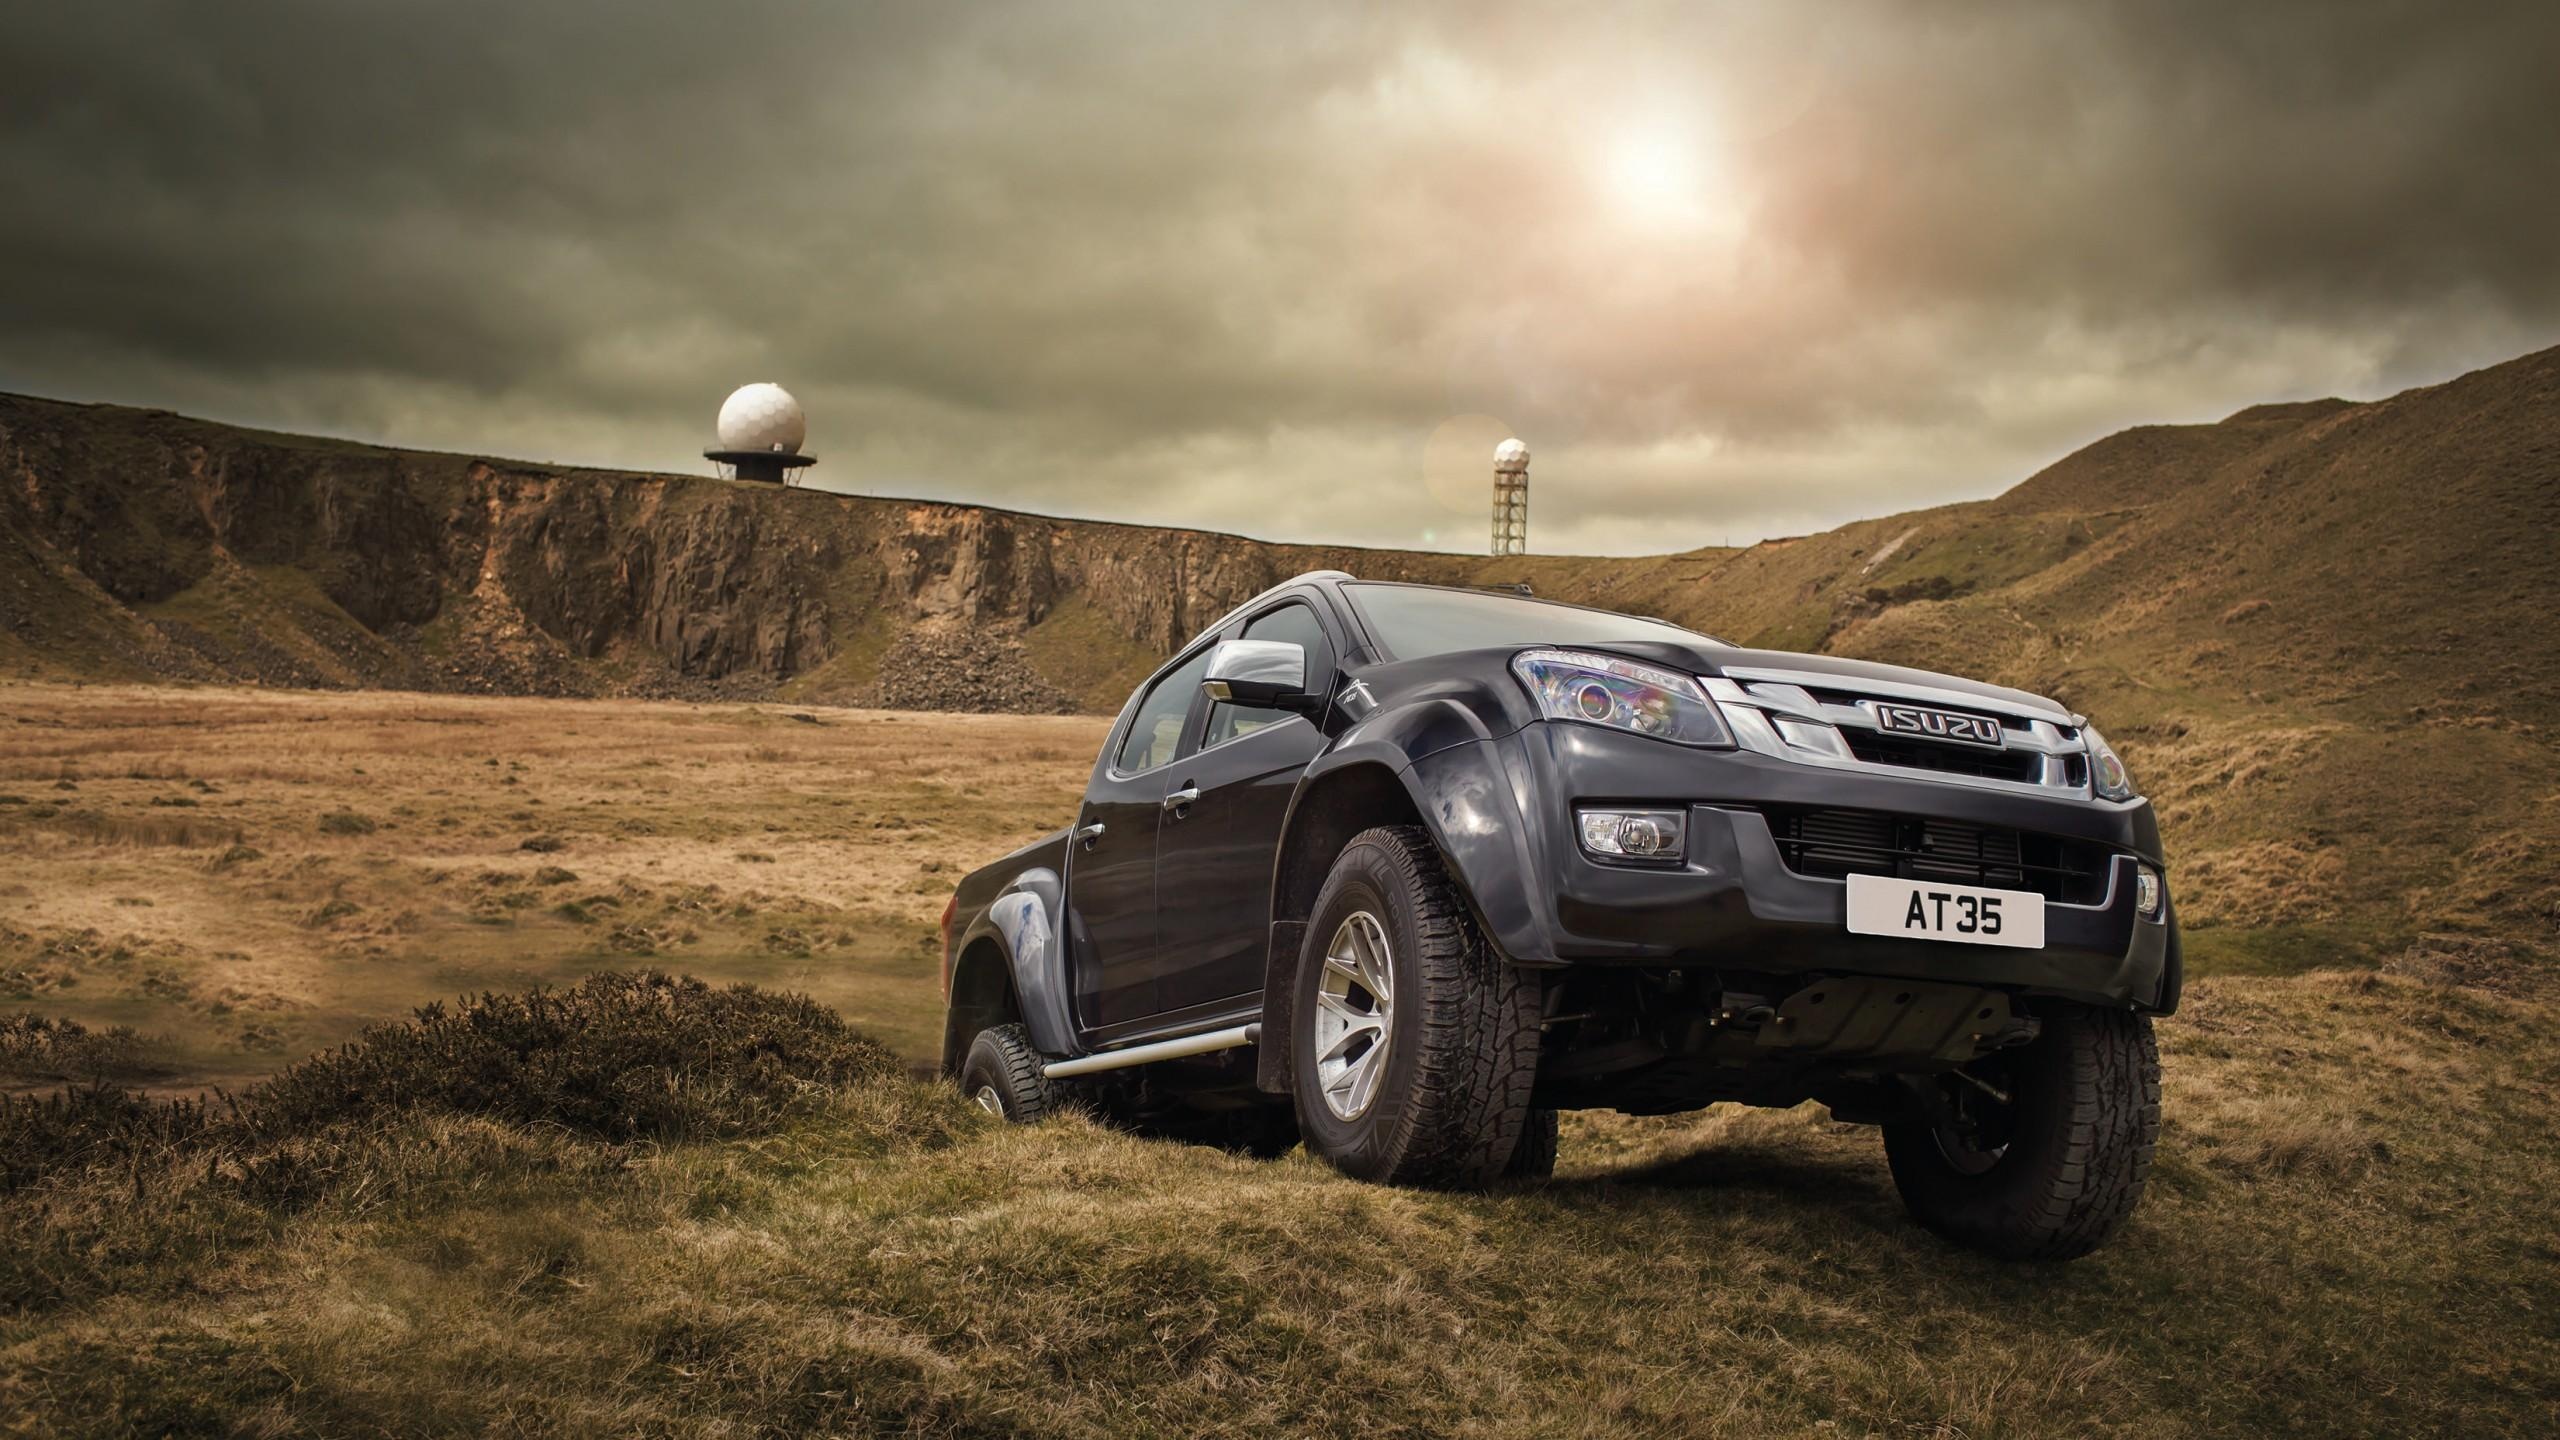 ISUZU Auto, D-Max wallpapers, Bold and powerful, Unmatched versatility, 2560x1440 HD Desktop